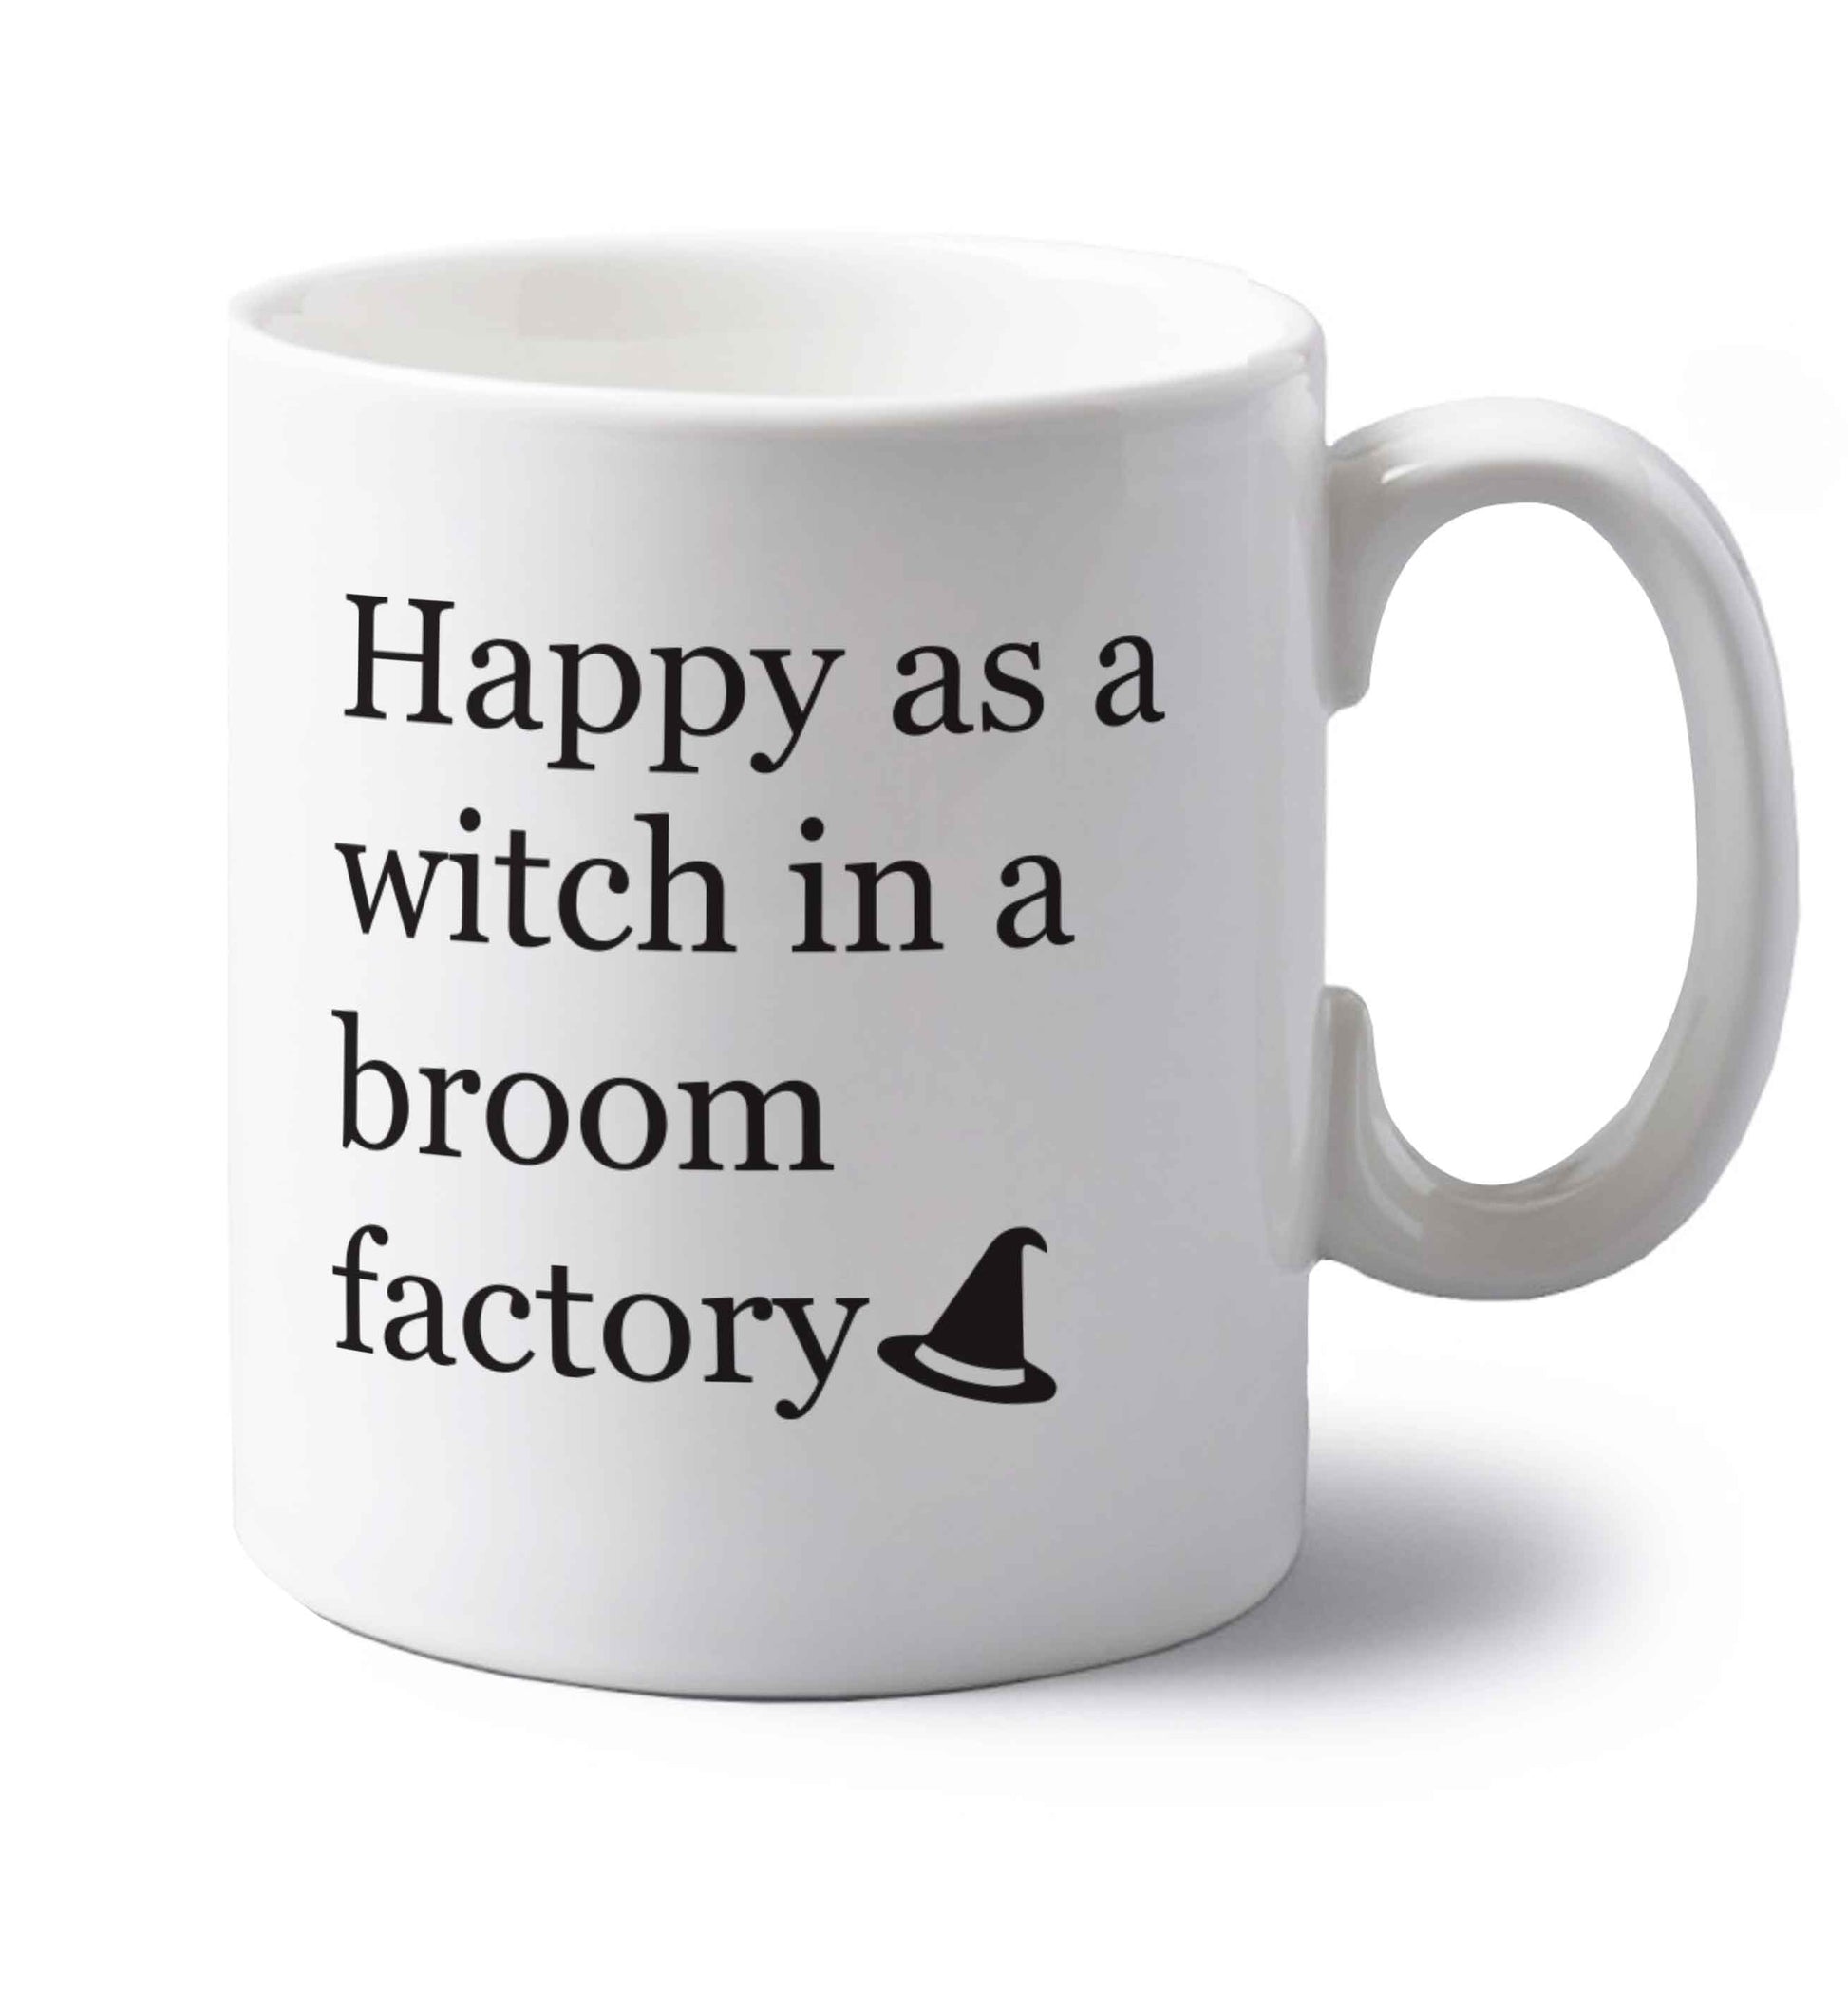 Happy as a witch in a broom factory left handed white ceramic mug 